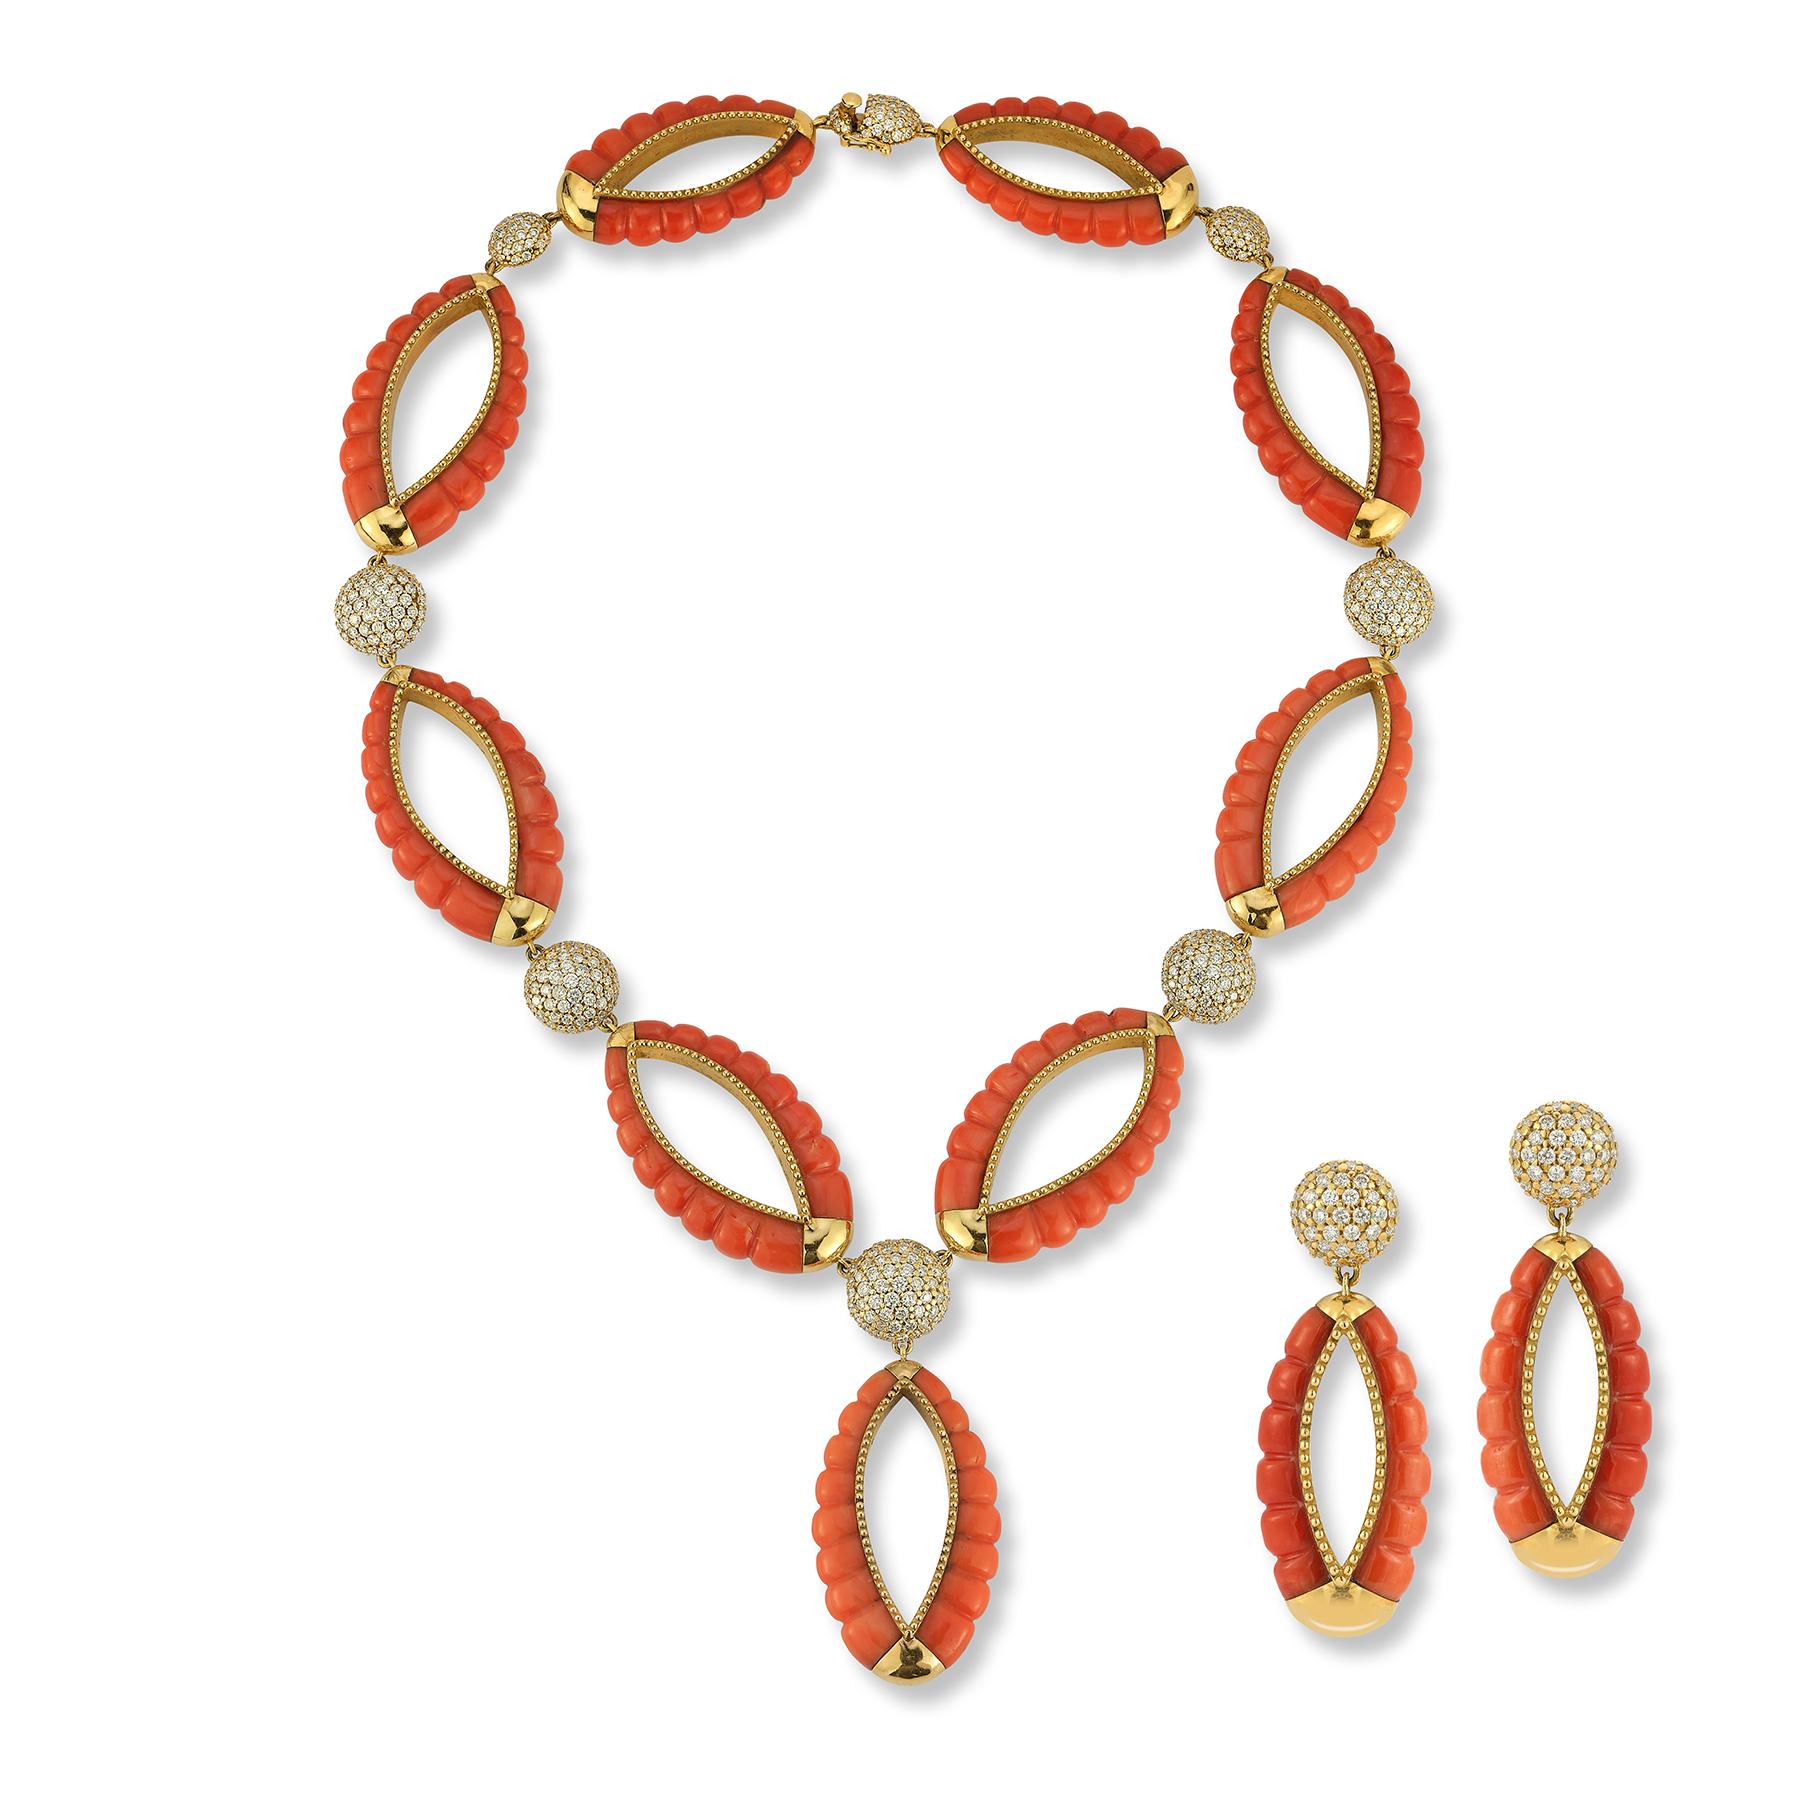 Bulgari Coral and Diamond Necklace and Earrings

Links of carved coral with pave diamond links.

Necklace Measurements: 18